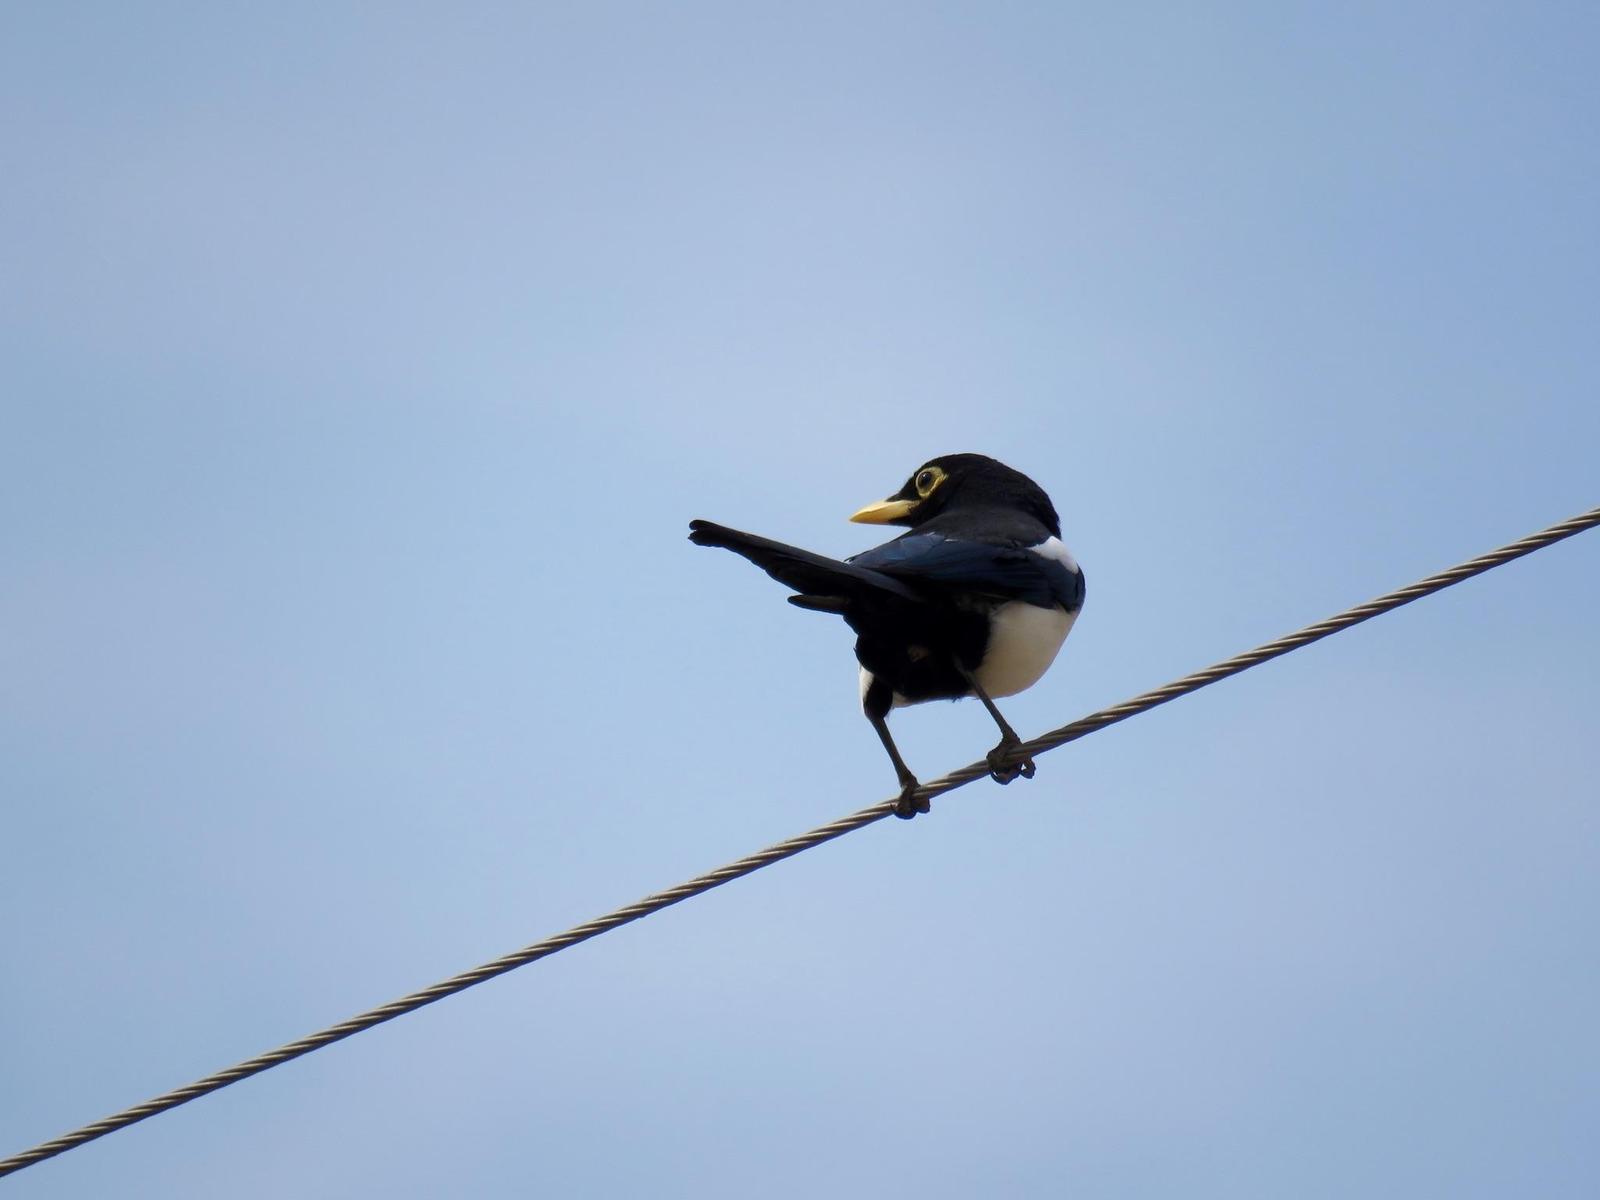 Yellow-billed Magpie Photo by Lisa Owens